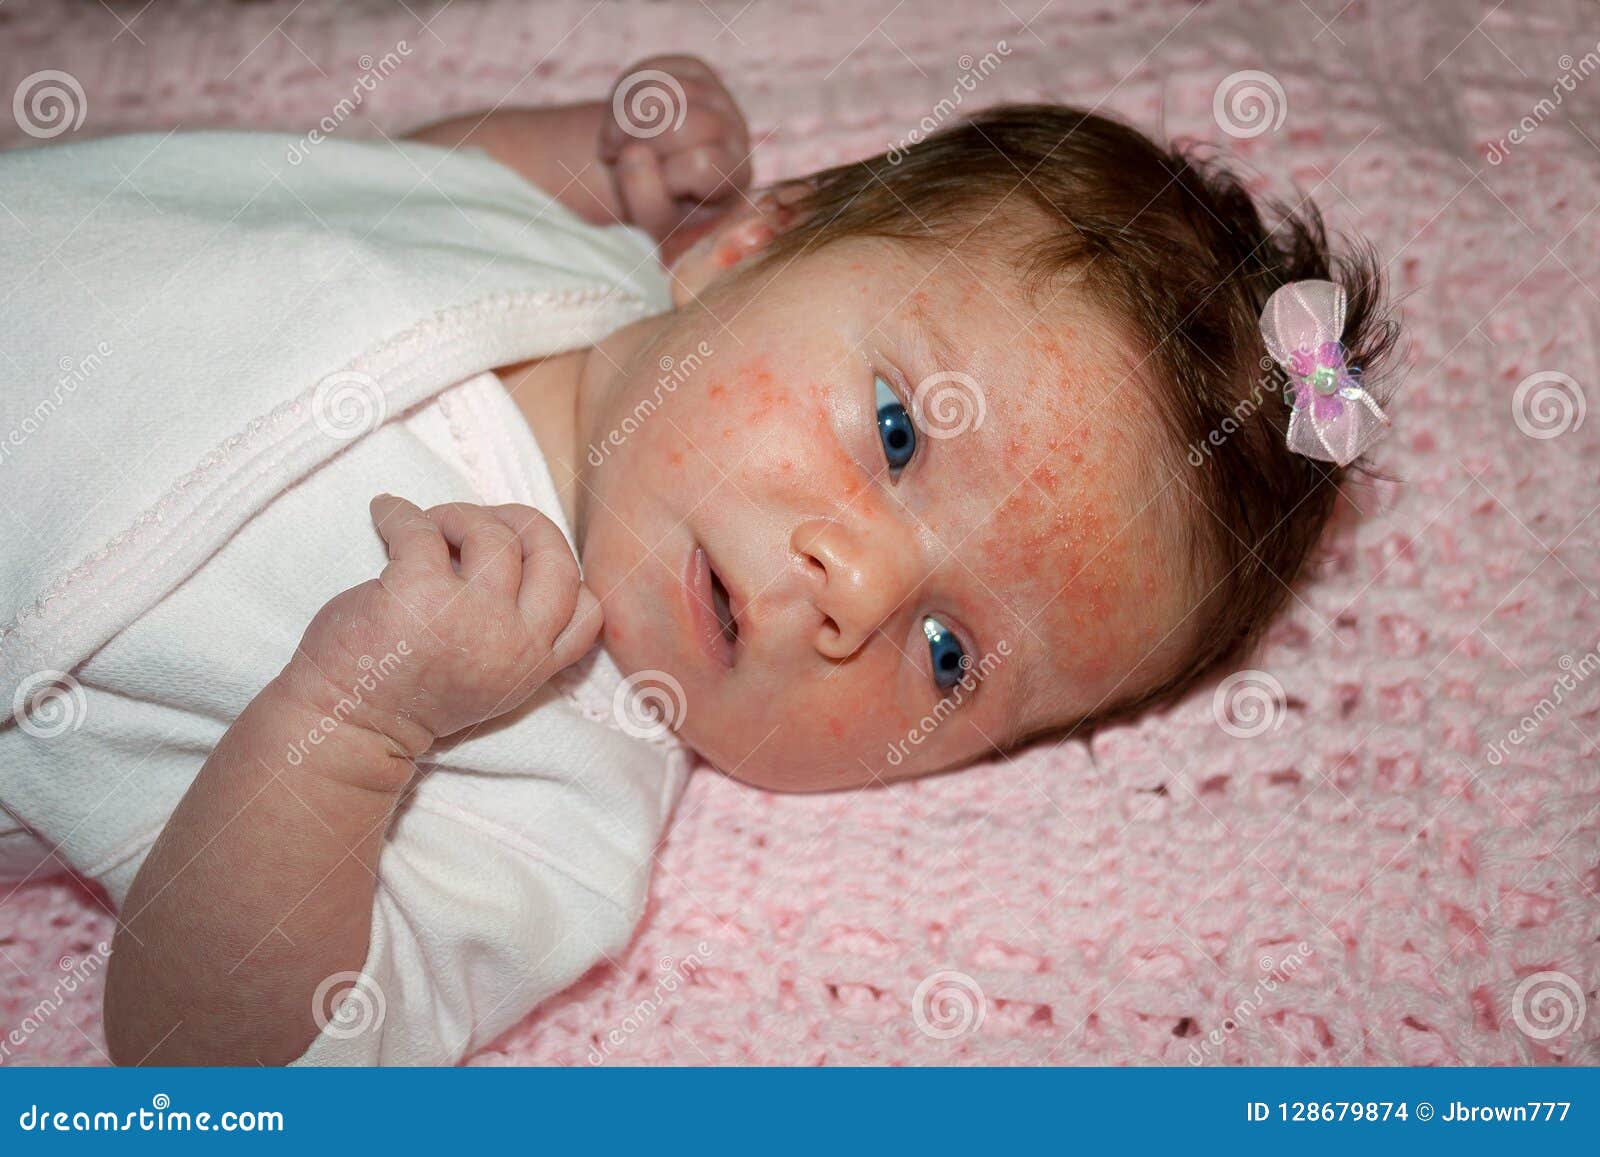 Newborn Baby With Severe Baby Acne Stock Photo Image Of Face